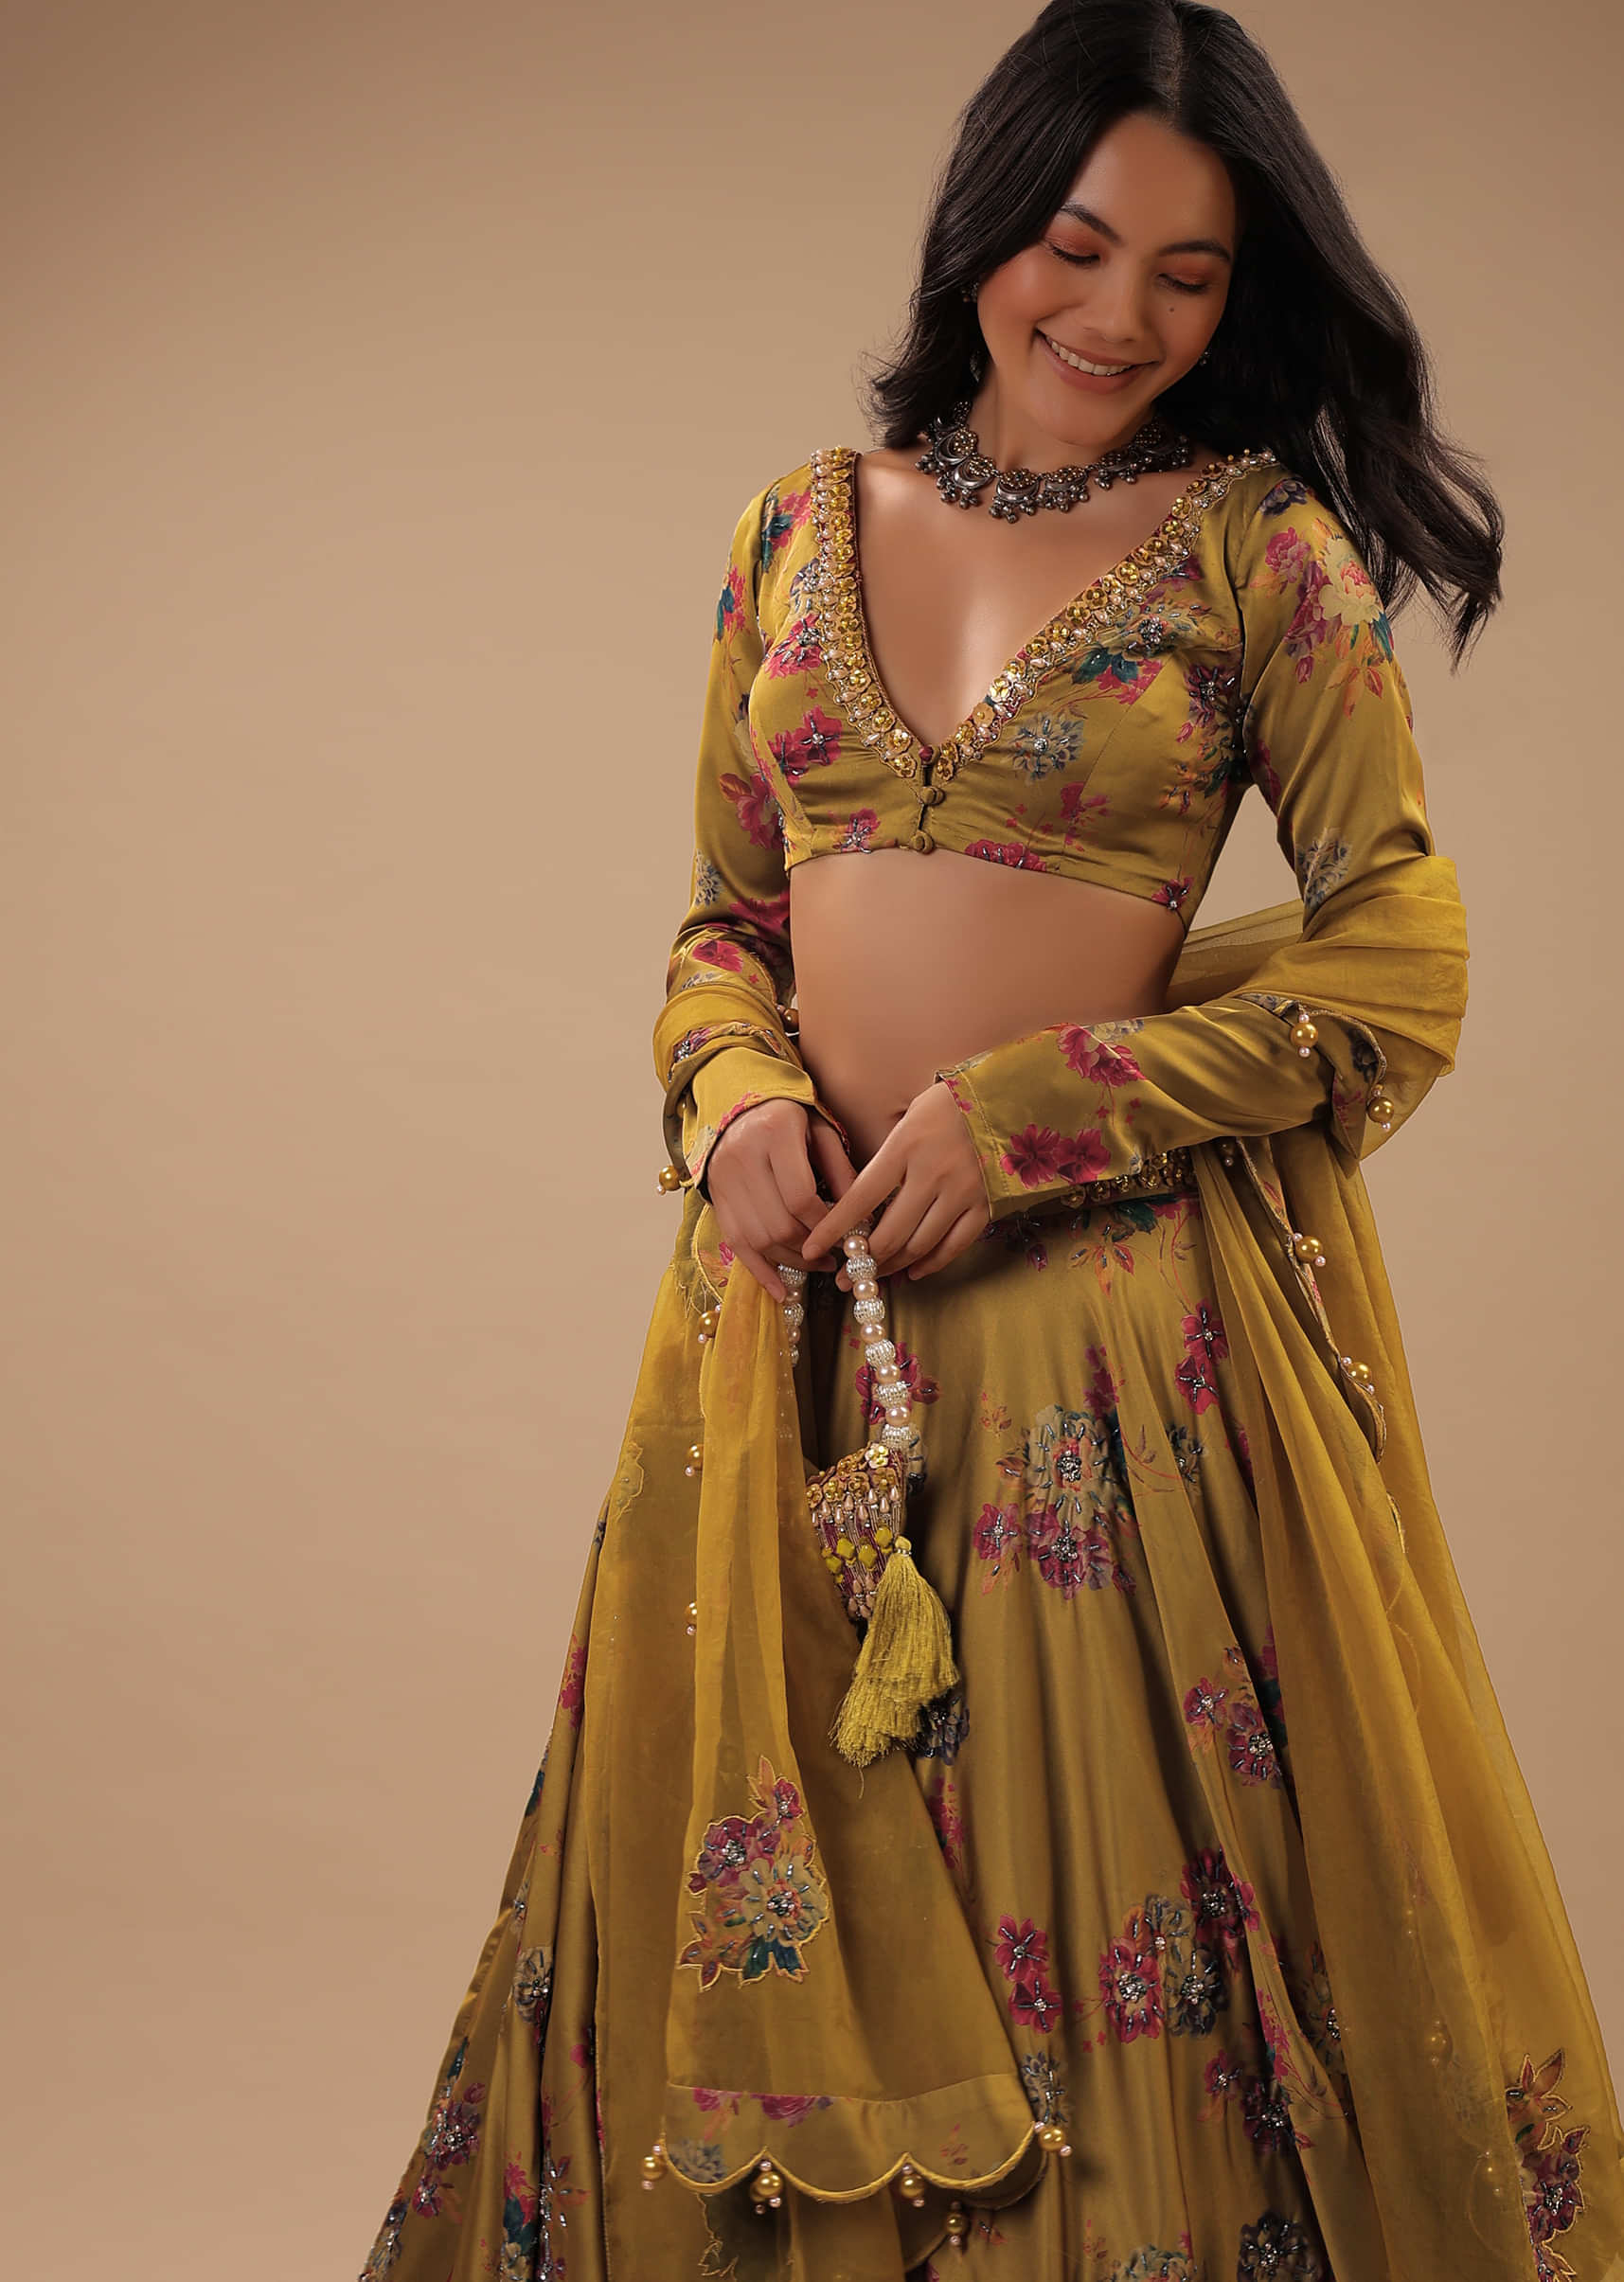 Sulphur Yellow Satin Crop Top And Skirt With Floral Print And Moti Embroidery